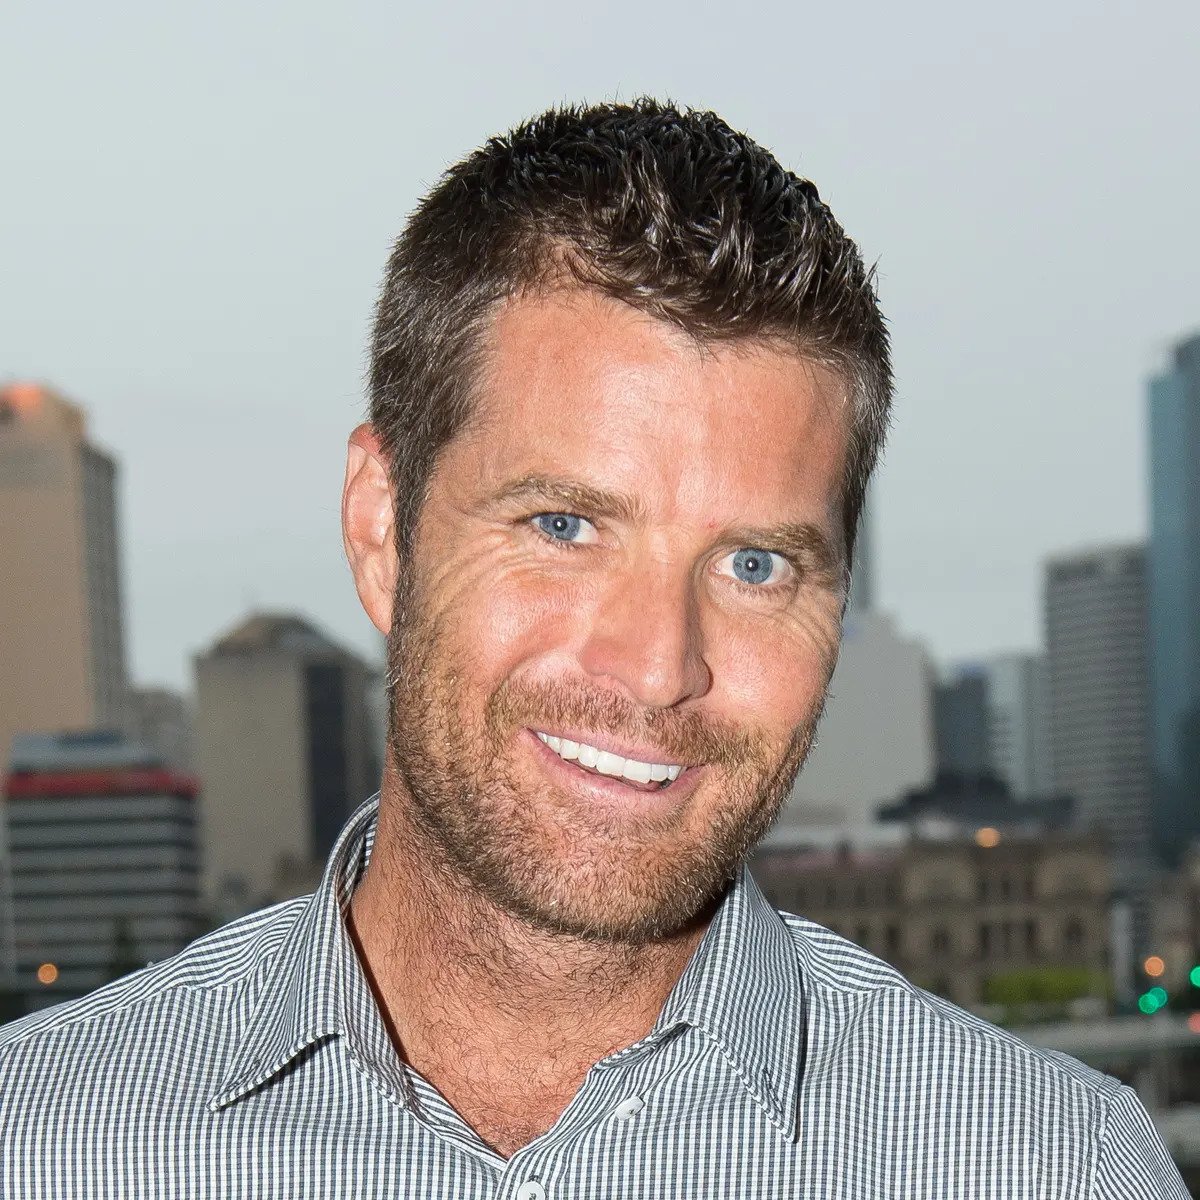 Chef pete evans wearing a blck and white striped shirt